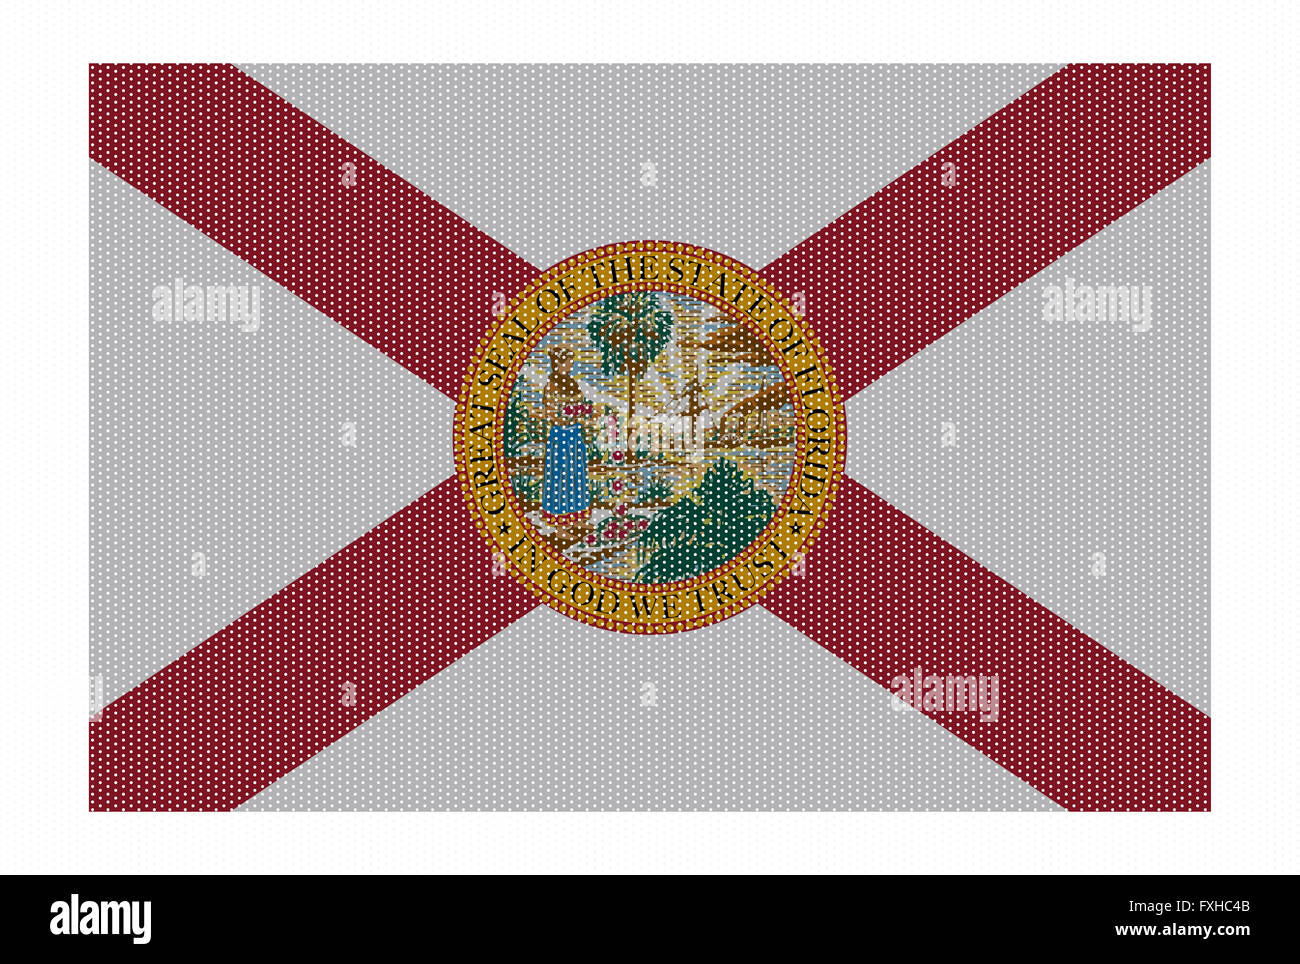 A retro looking Florida flag isolated on a white background Stock Photo